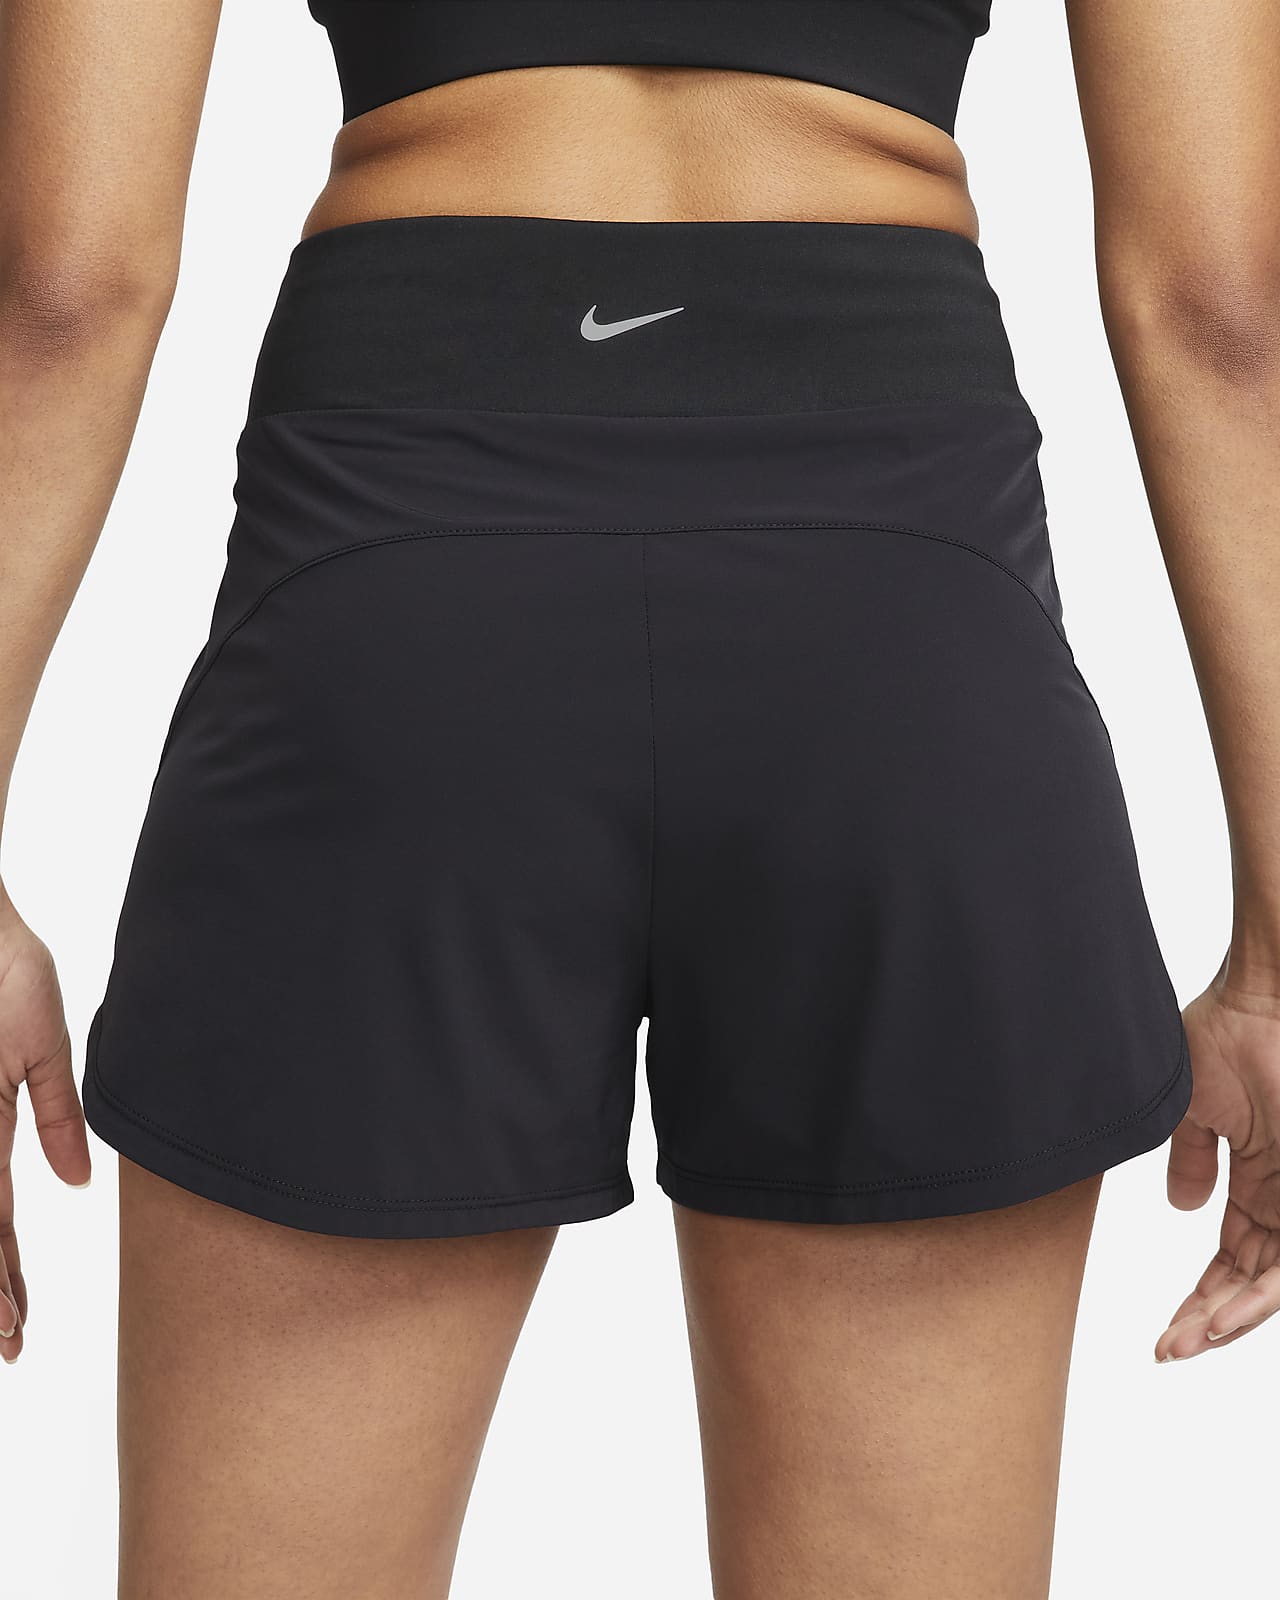 Nike Bliss Women's Dri-FIT Fitness High-Waisted 3